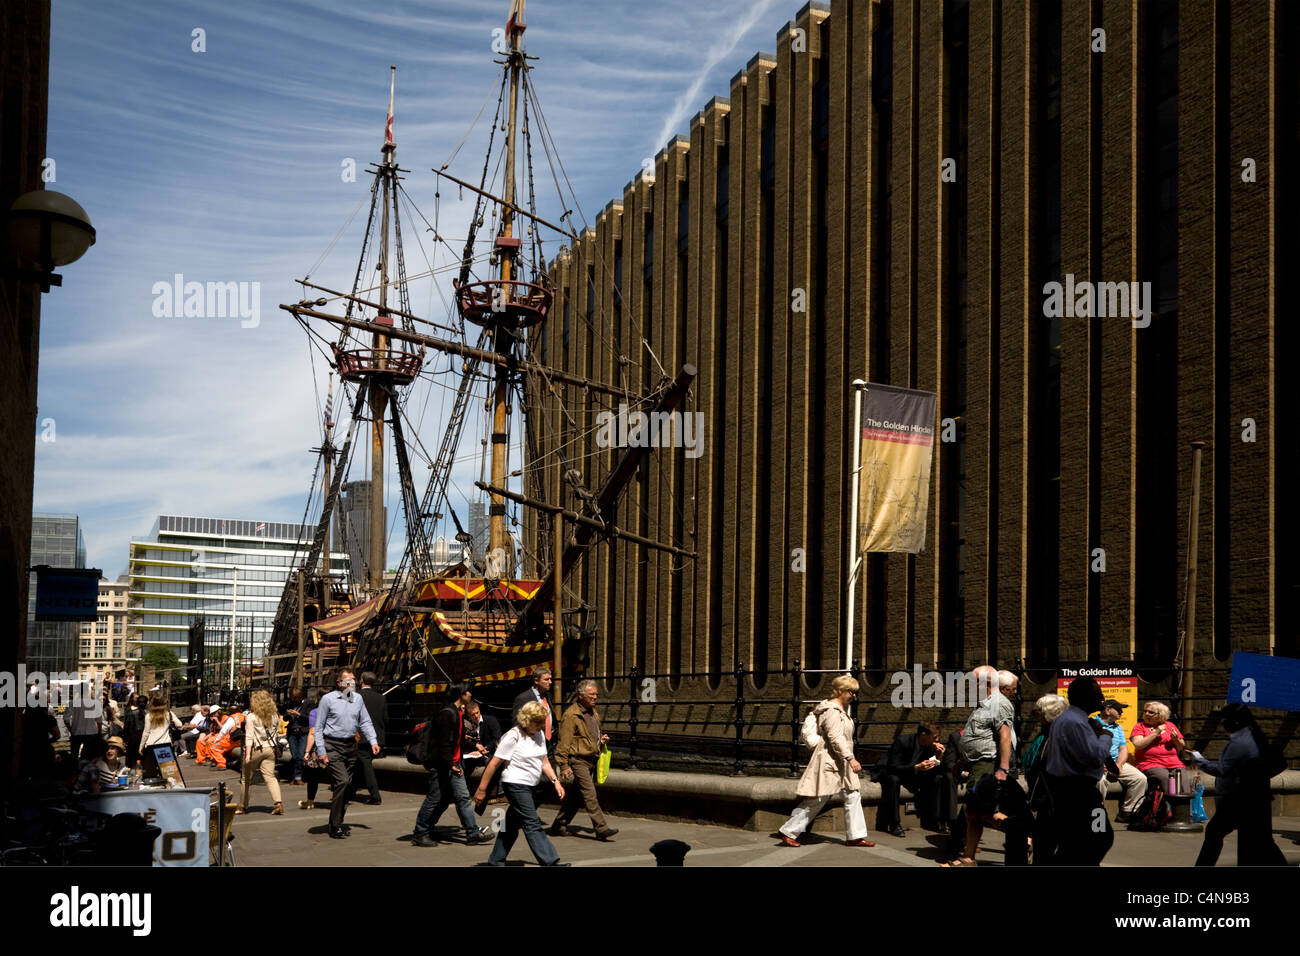 die golden Hind St Mary Overie dock Southwark London England Stockfoto